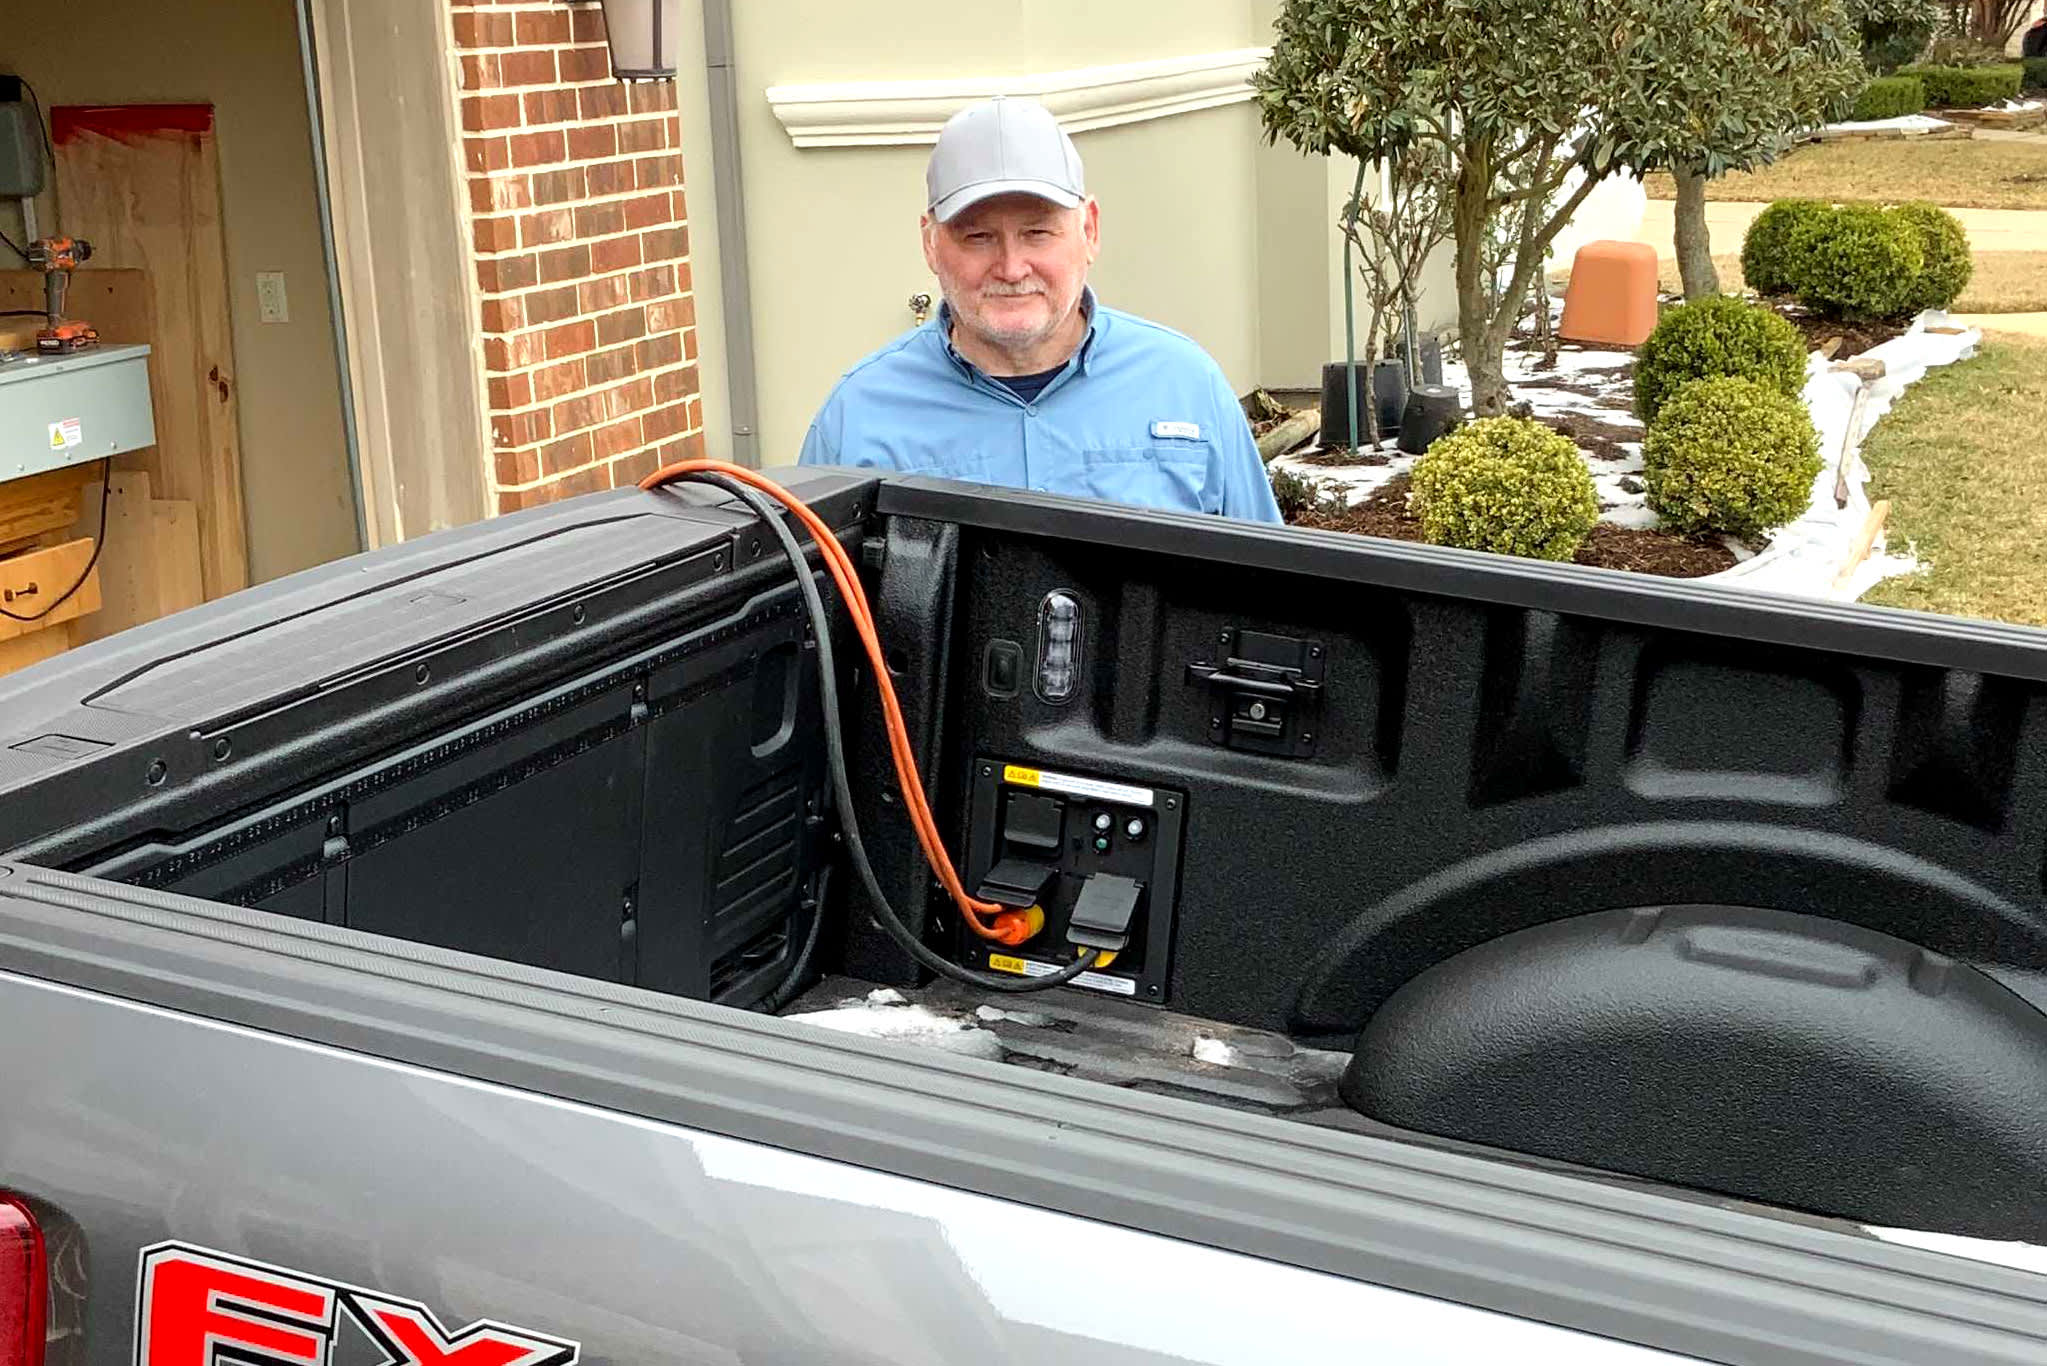 Some use Ford F-150 hybrids to power homes